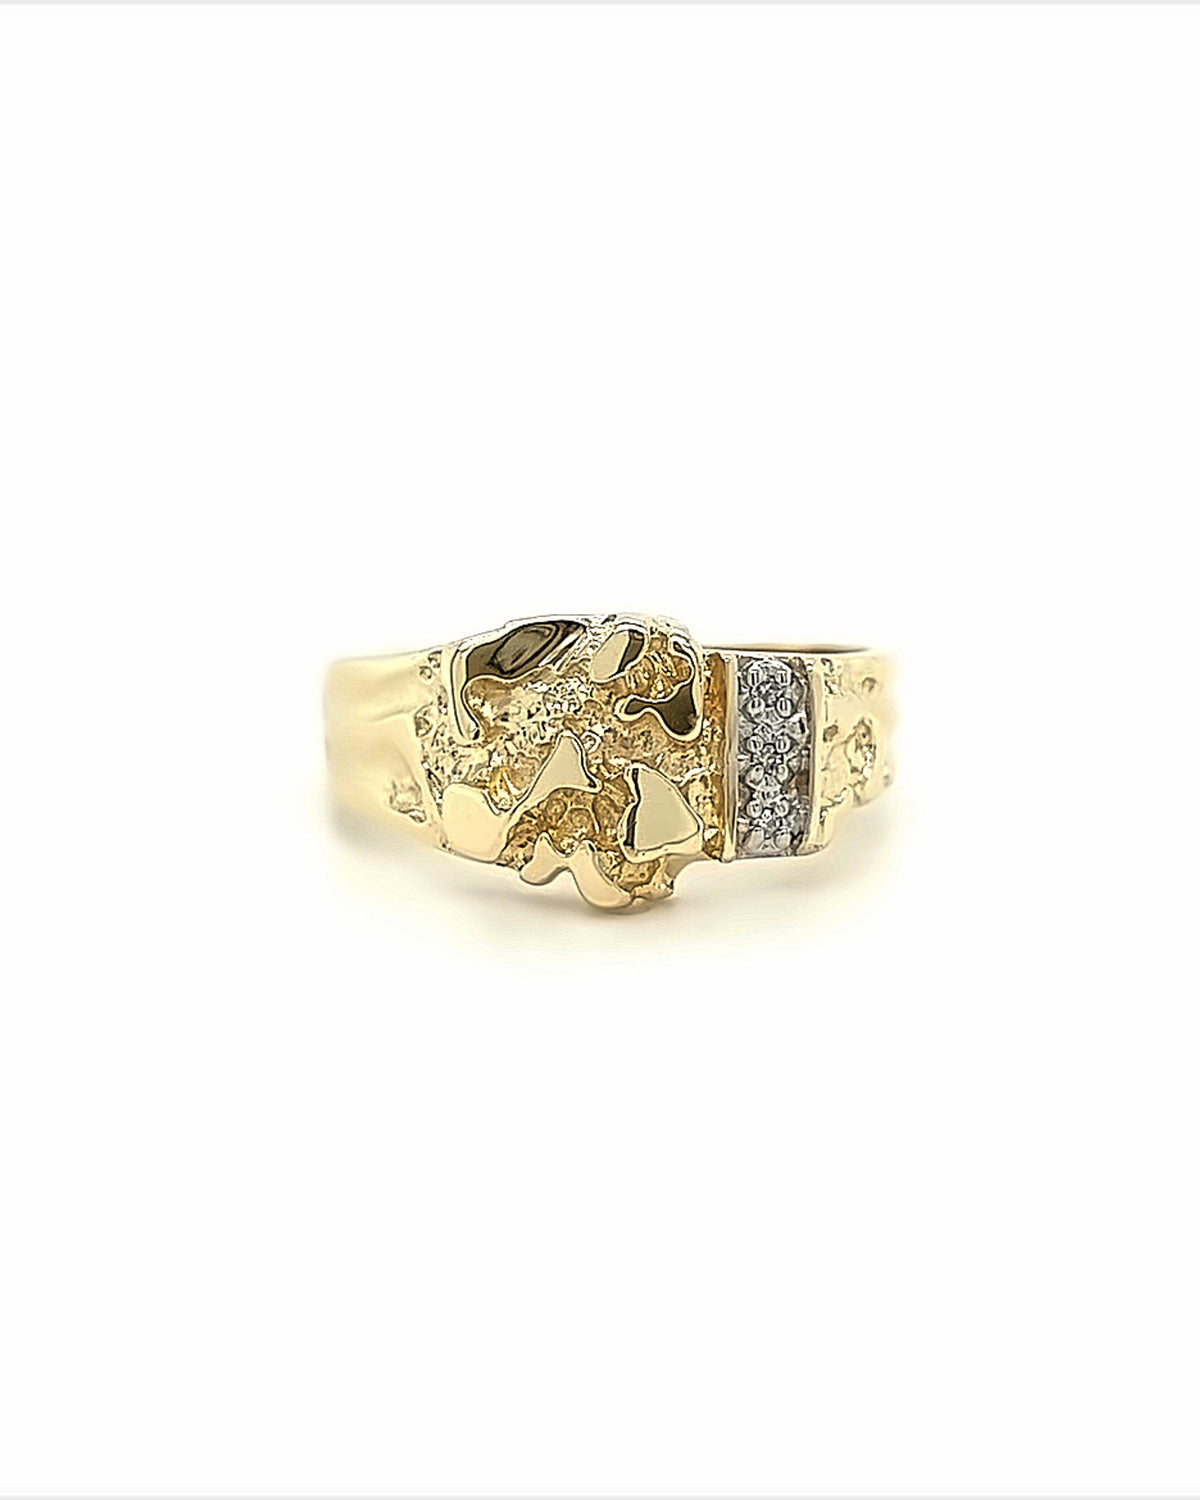 10KT YELLOW GOLD NUGGET STYLE WITH DIAMONDS